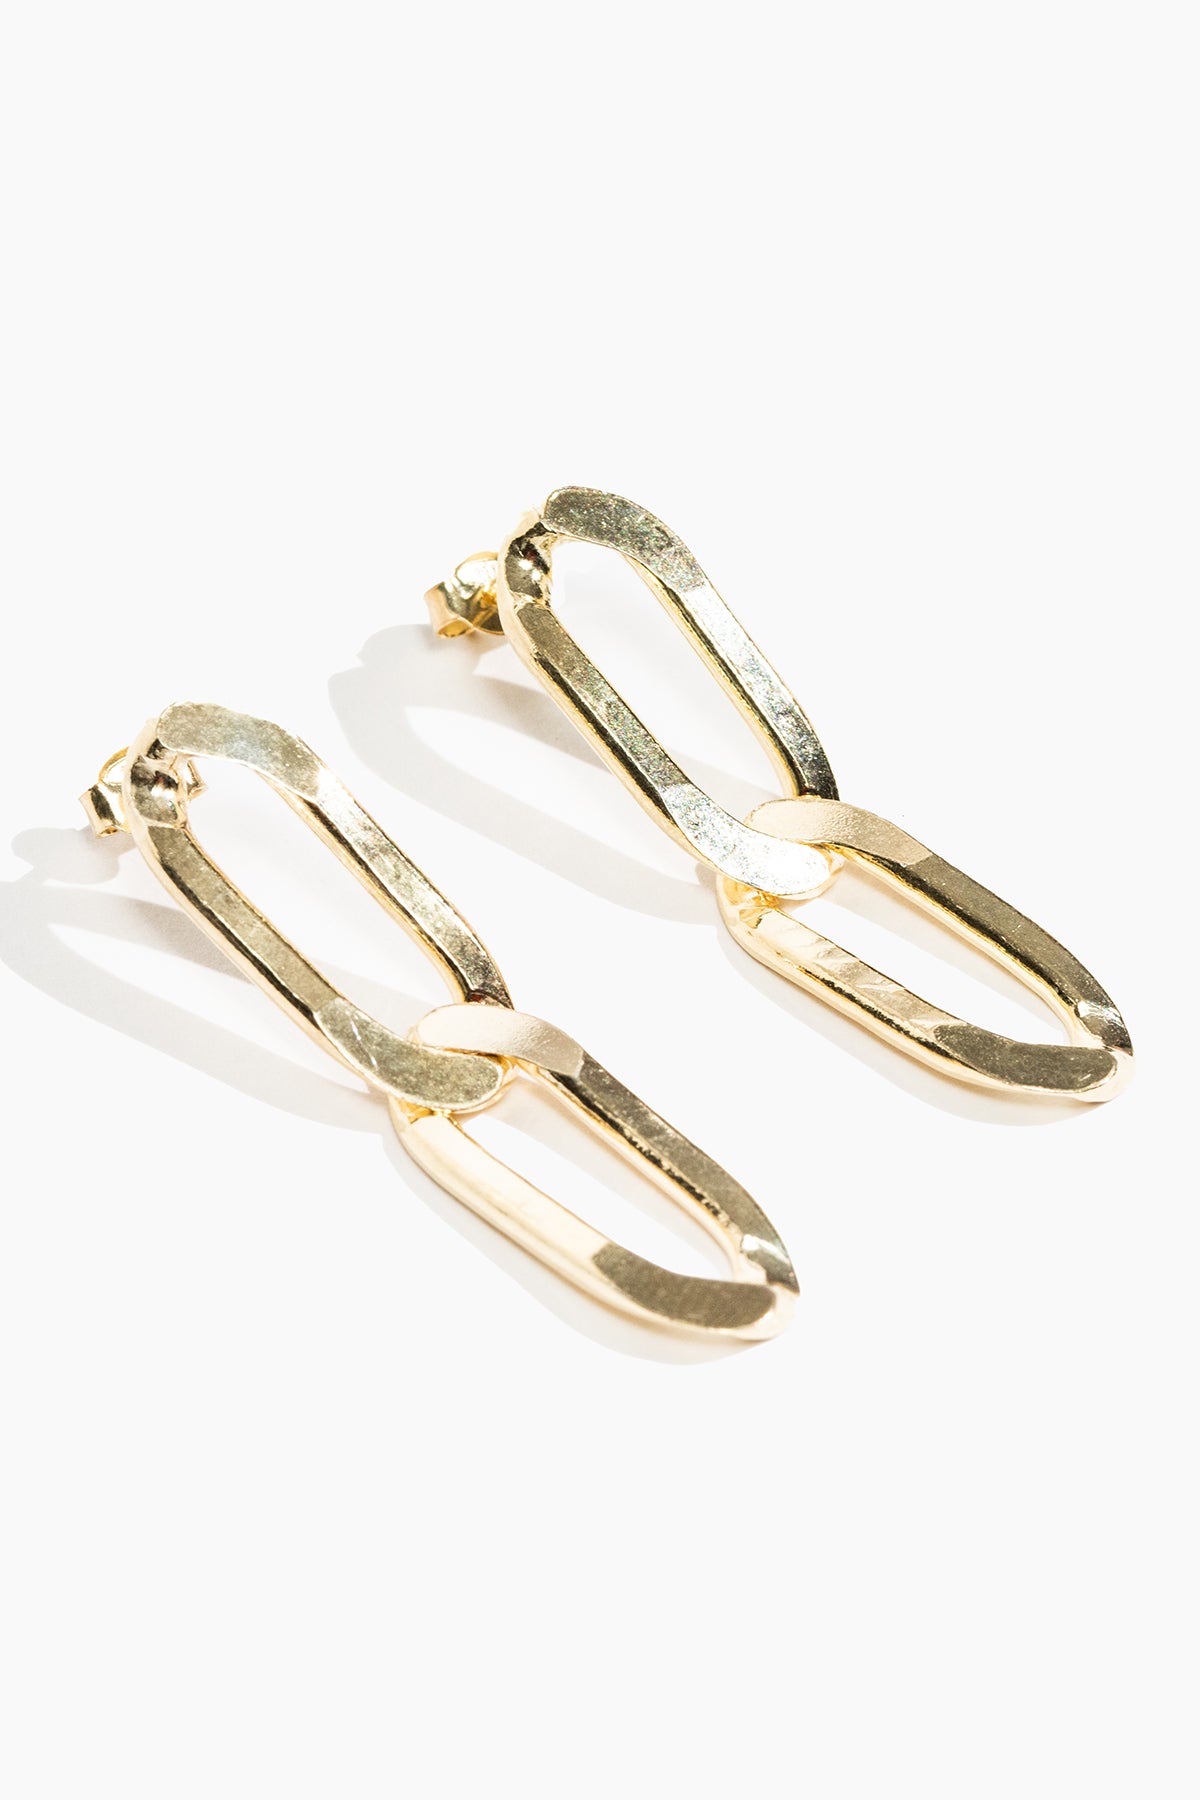 Bubba Earrings Gold by Phyllis & Rosie 2-23749623218369